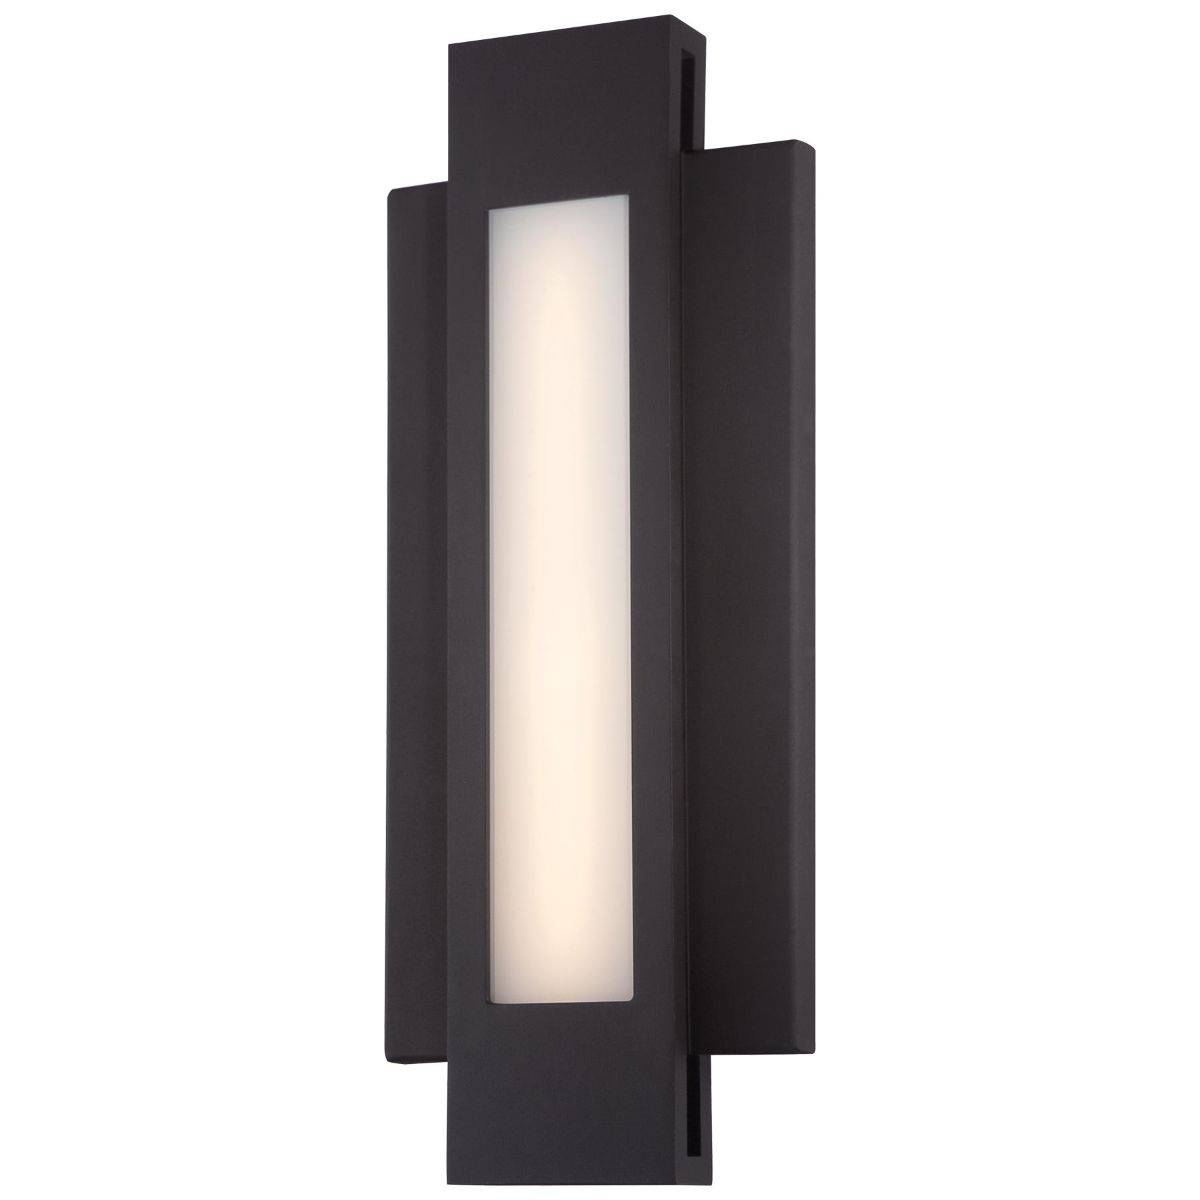 Insert 17 in. LED Outdoor Wall Sconce Bronze Finish